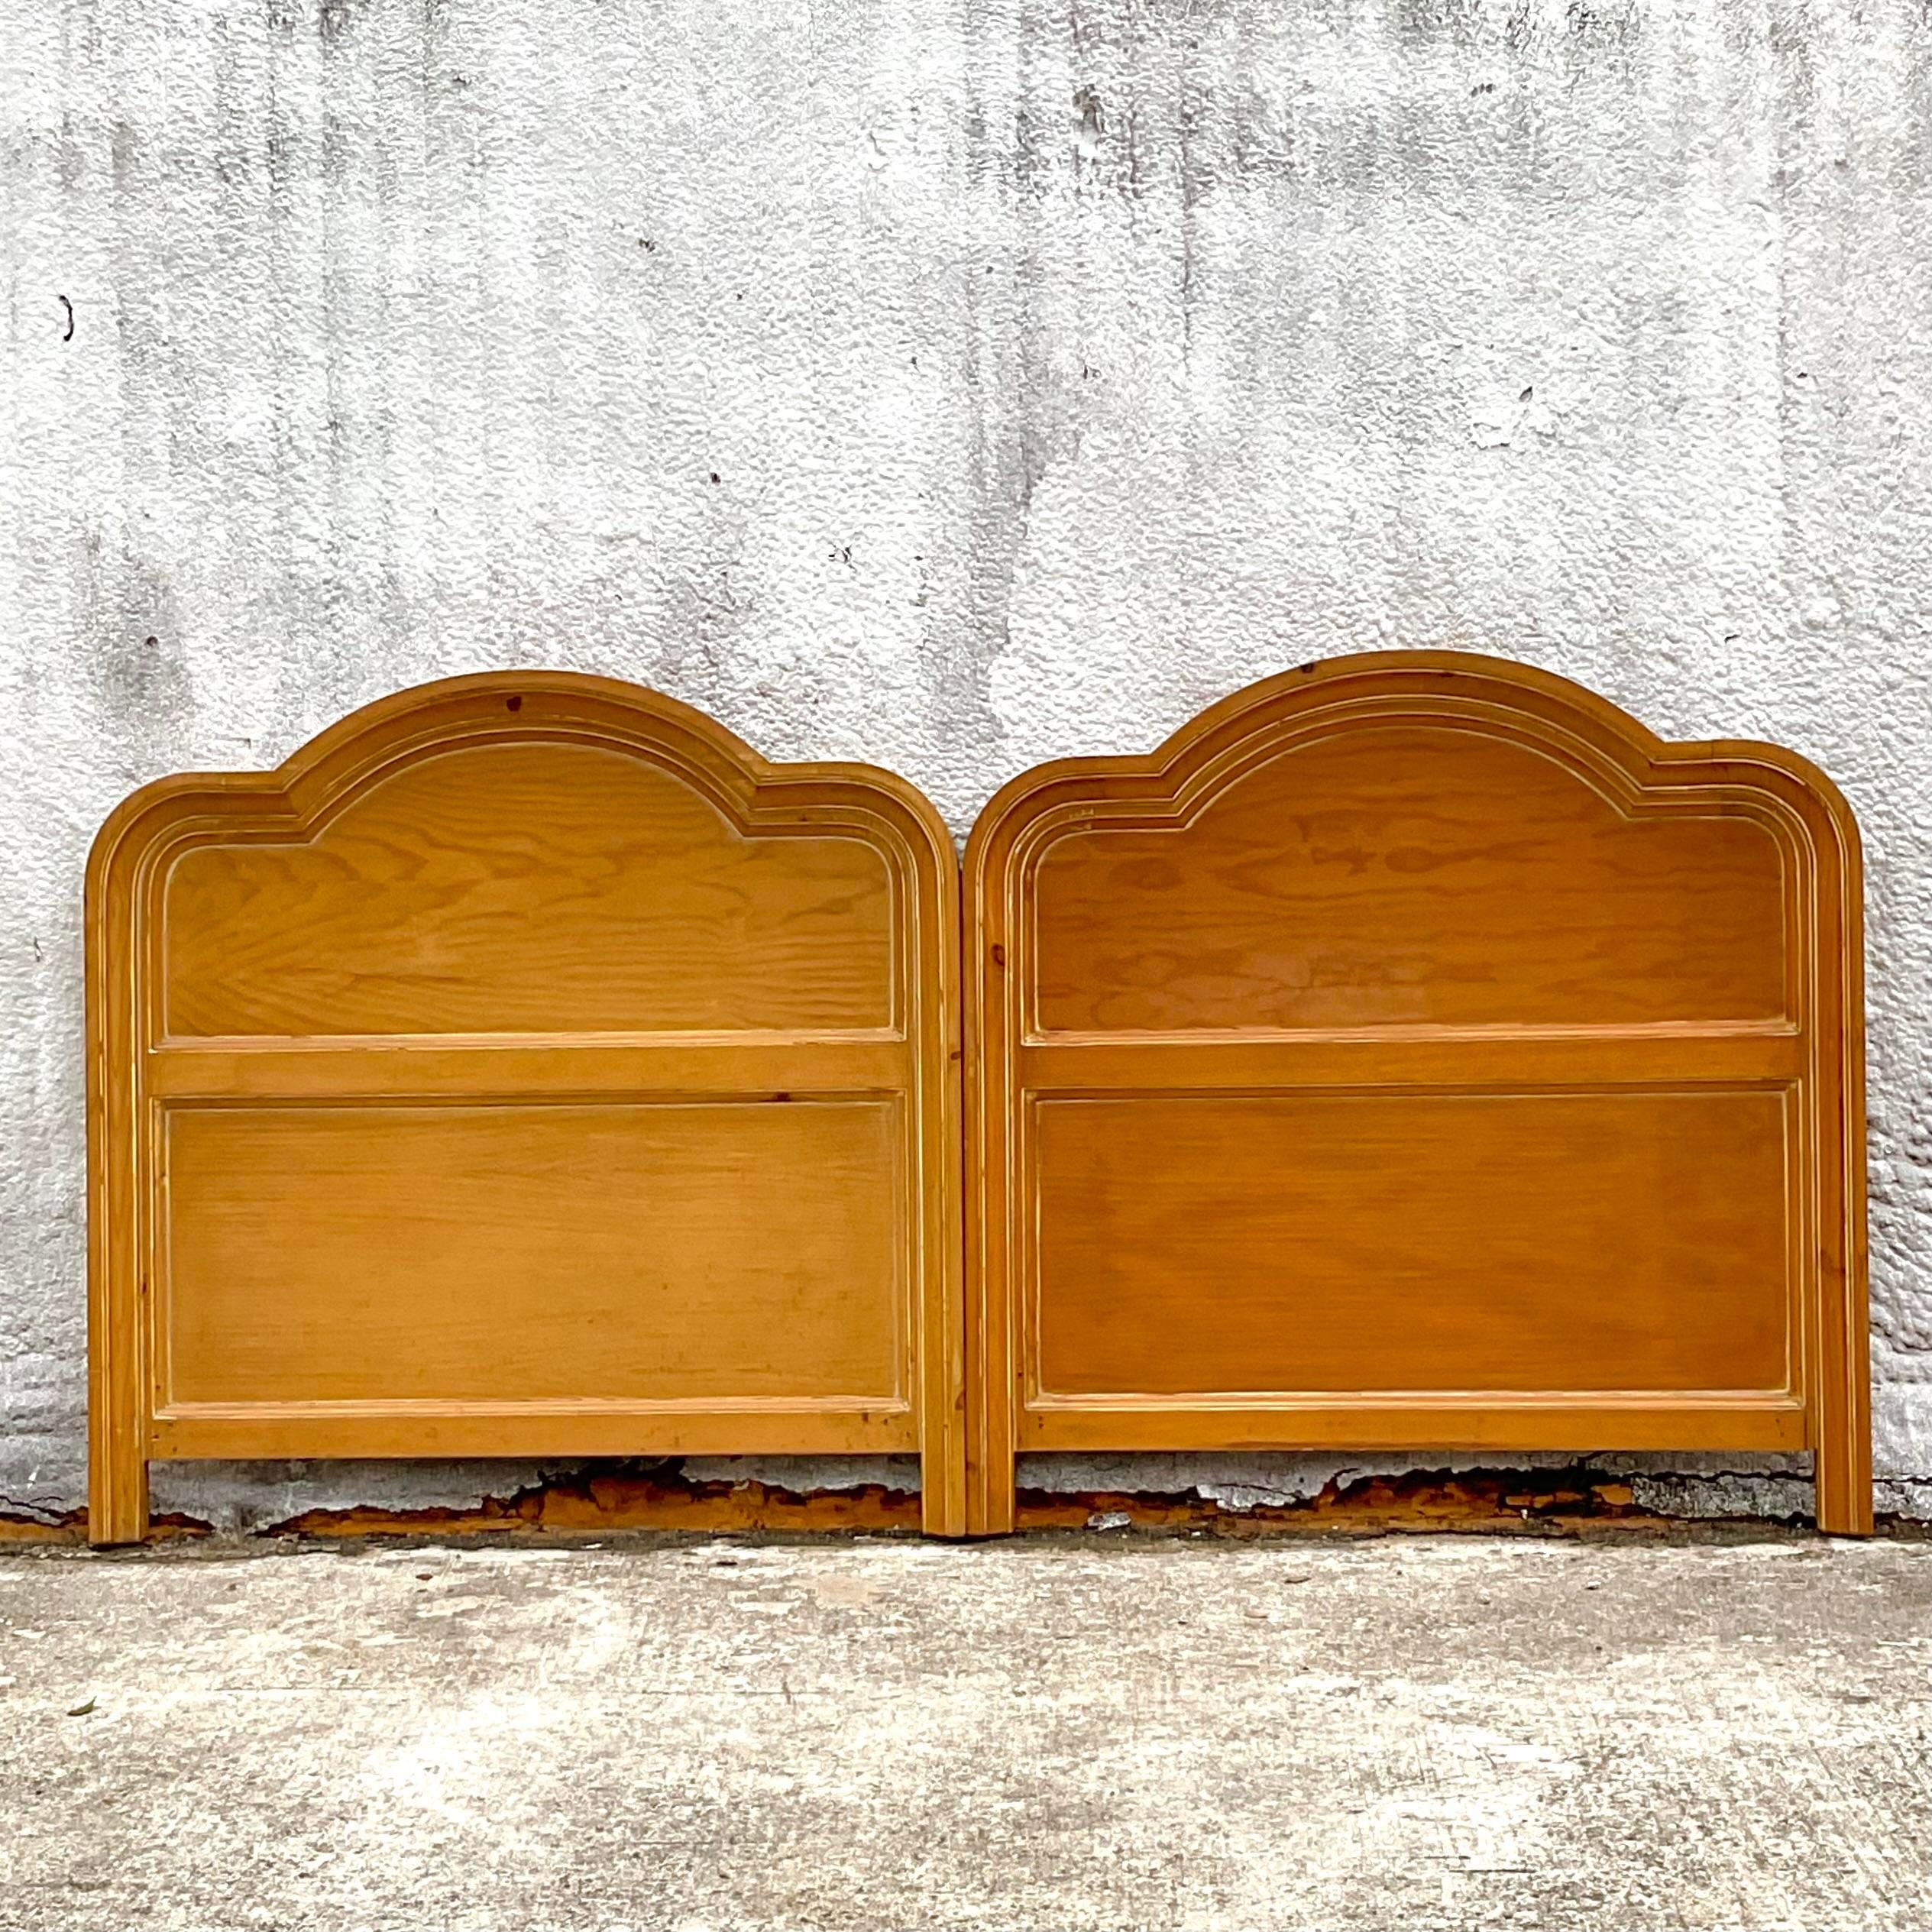 Bohemian Late 20th Century Vintage Wooden Trim Detailed Twin Headboards - A Pair For Sale